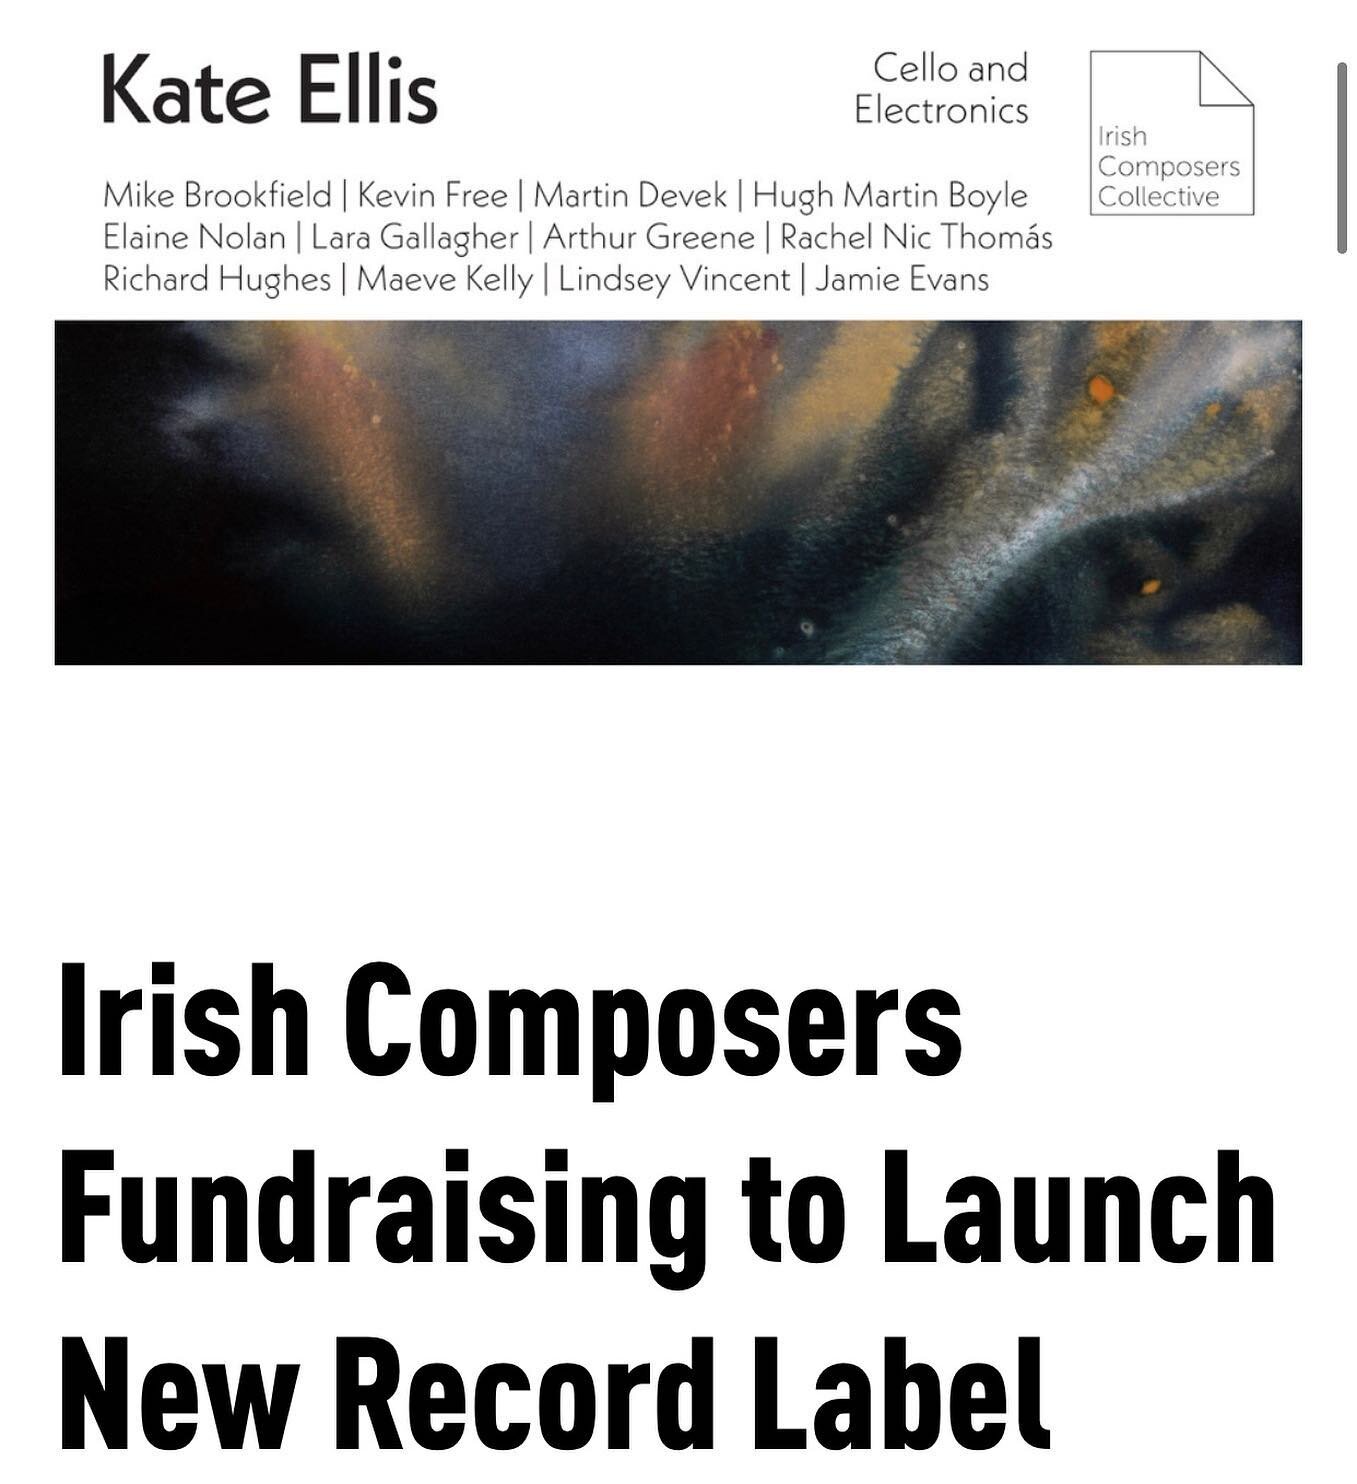 Thank you to the @journalofmusic for their article around our fundraiser for the record label! 💿 We have some exciting news regarding the campaign that we will be sharing soon✨
.
.
.
#irishcomposers #irishcomposerscollective #recordlabel #icclabel #